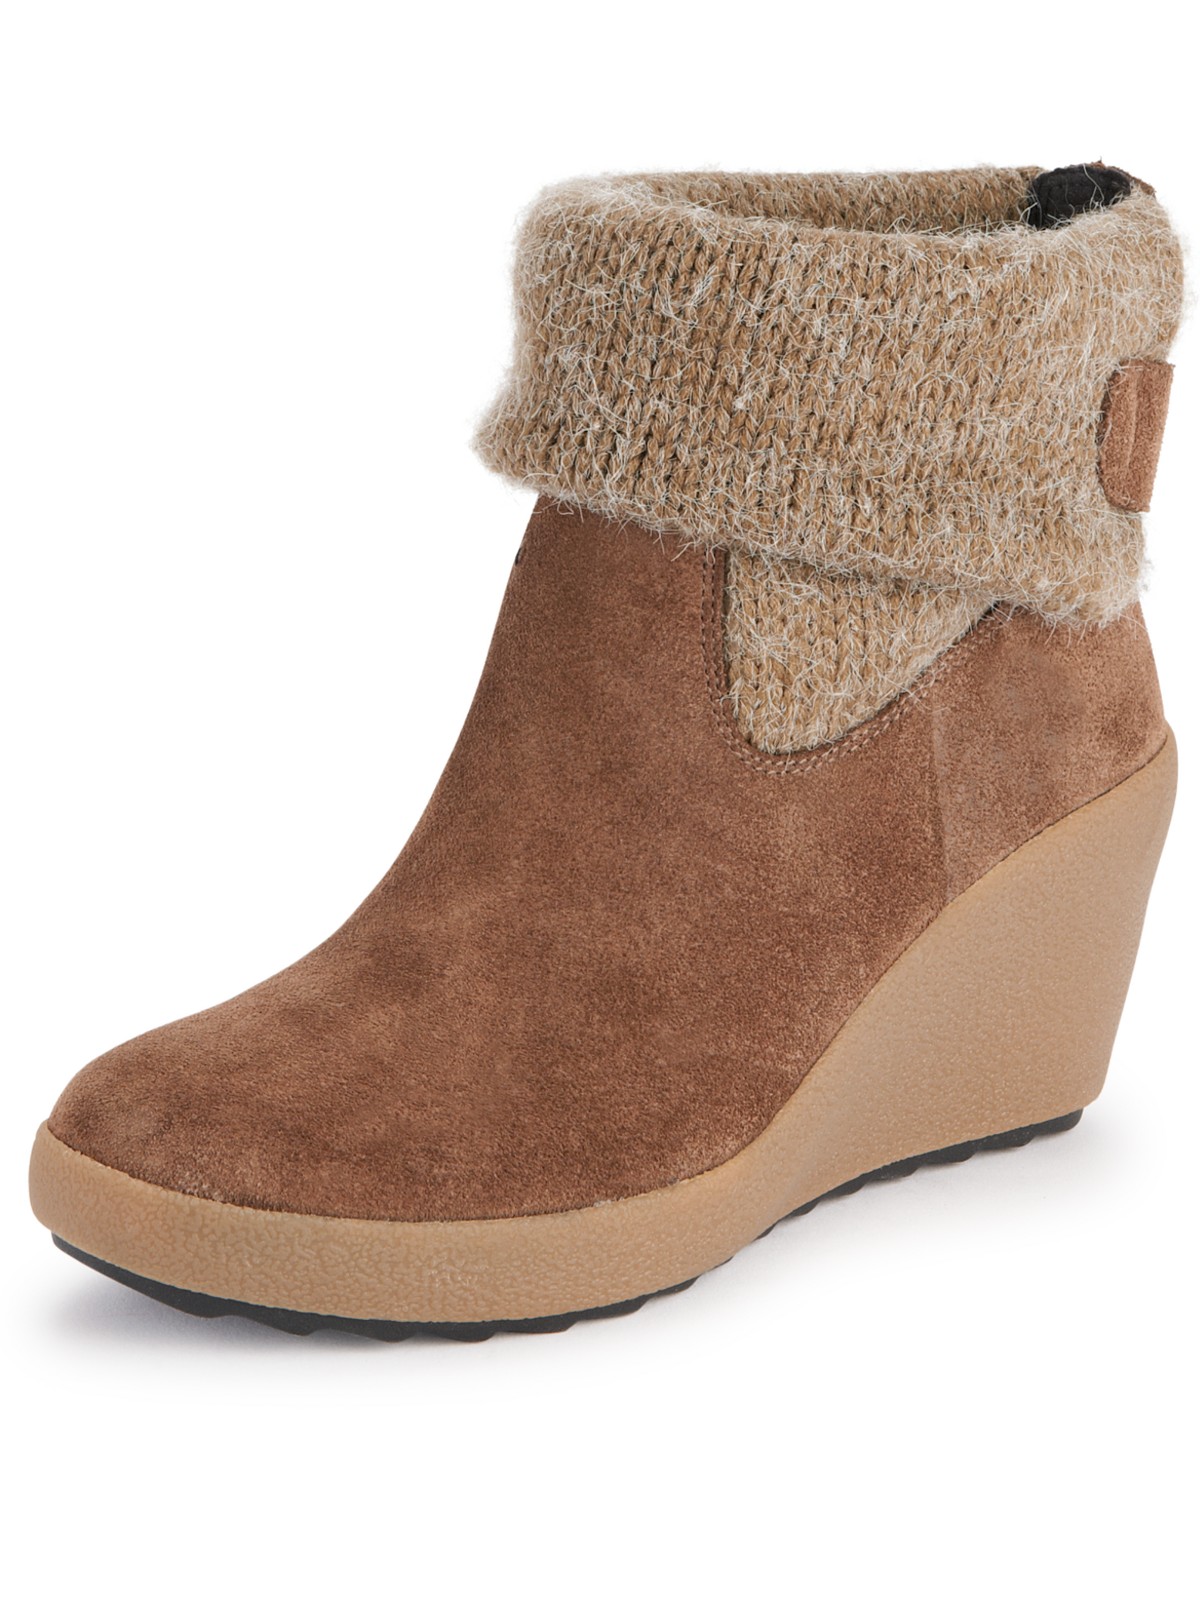 Clarks Shoes | Heels, Wedges, Boots & Sneakers | Lyst